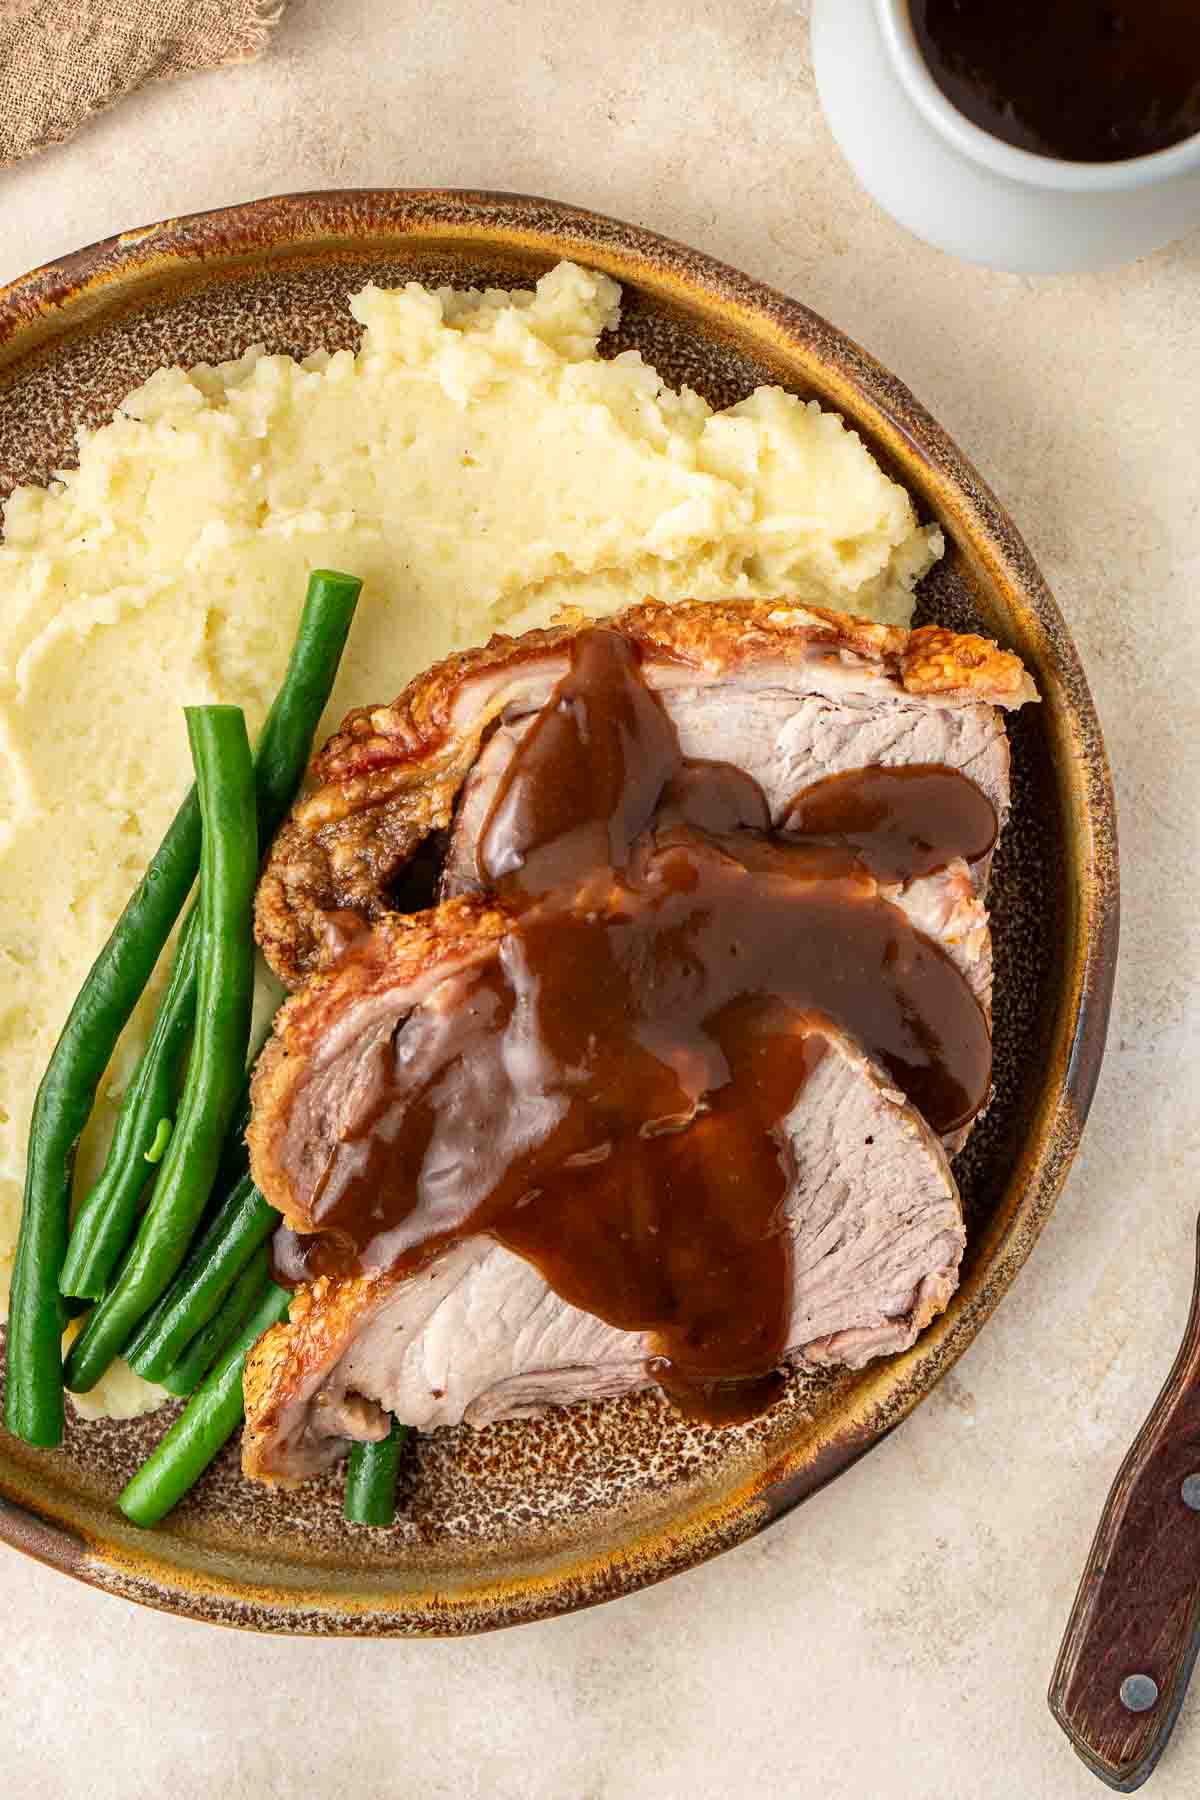 Close up of roast pork slices with gravy over mashed potatoes and green beans.